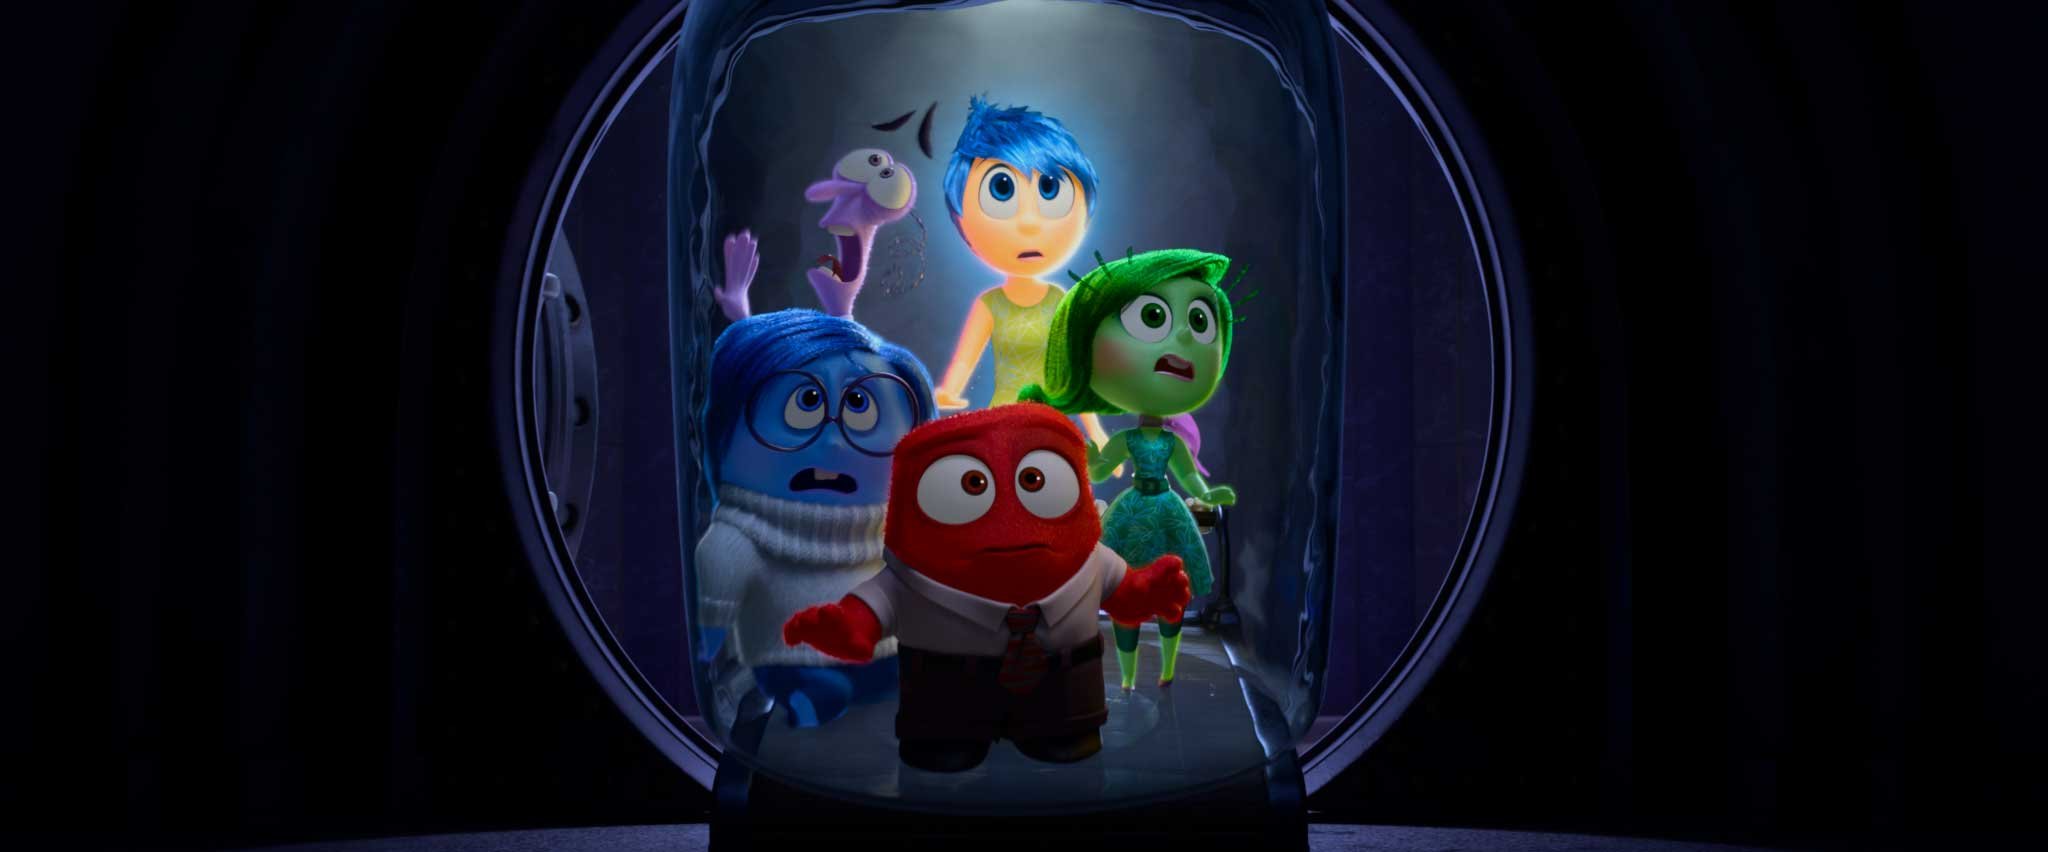 ‘Inside Out 2’ is an Emotional Rollercoaster